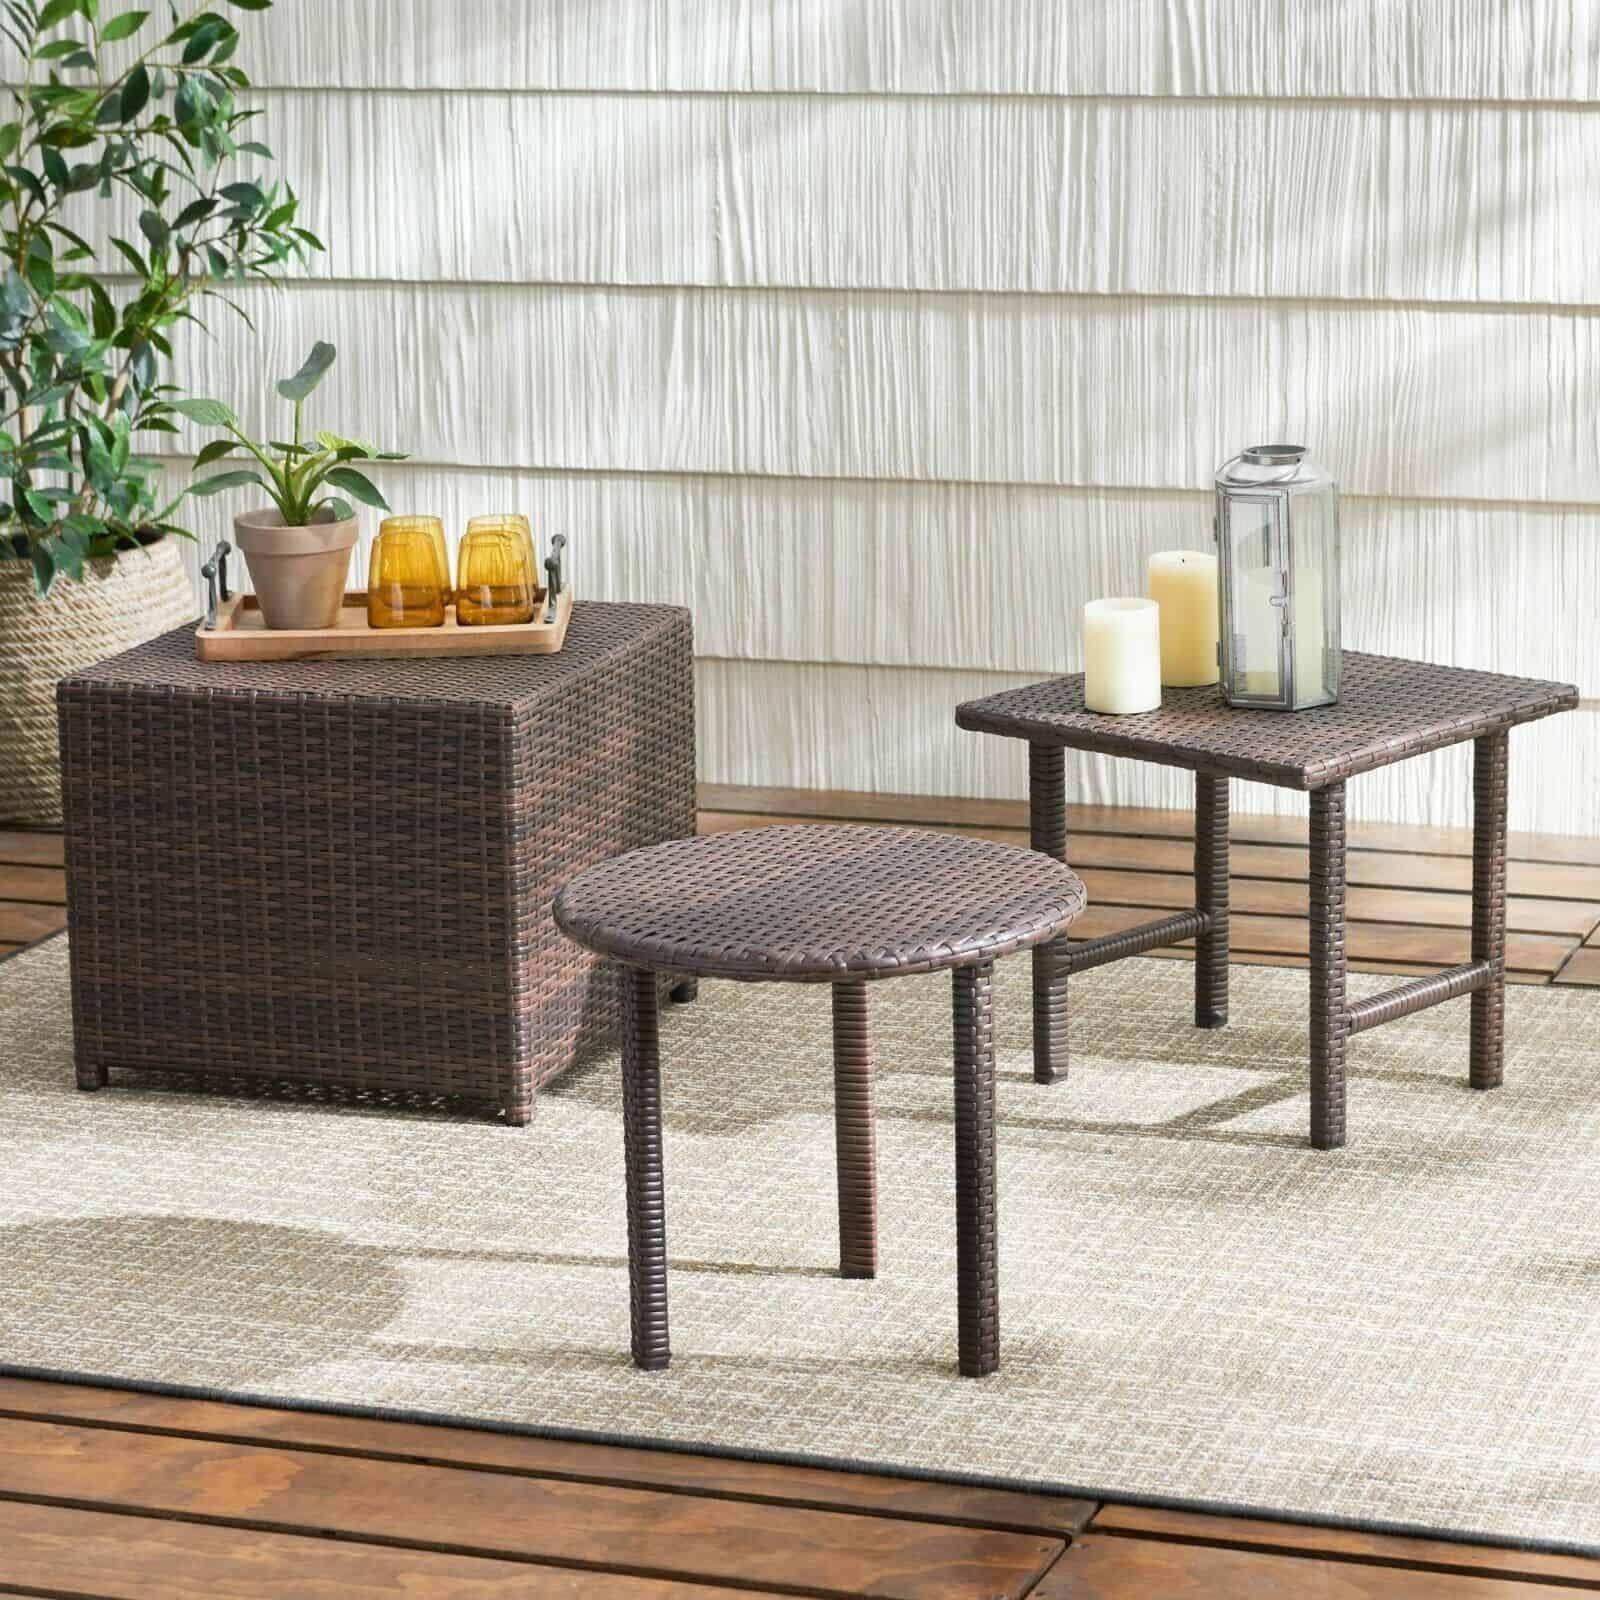 Two wicker side tables on a wooden deck.